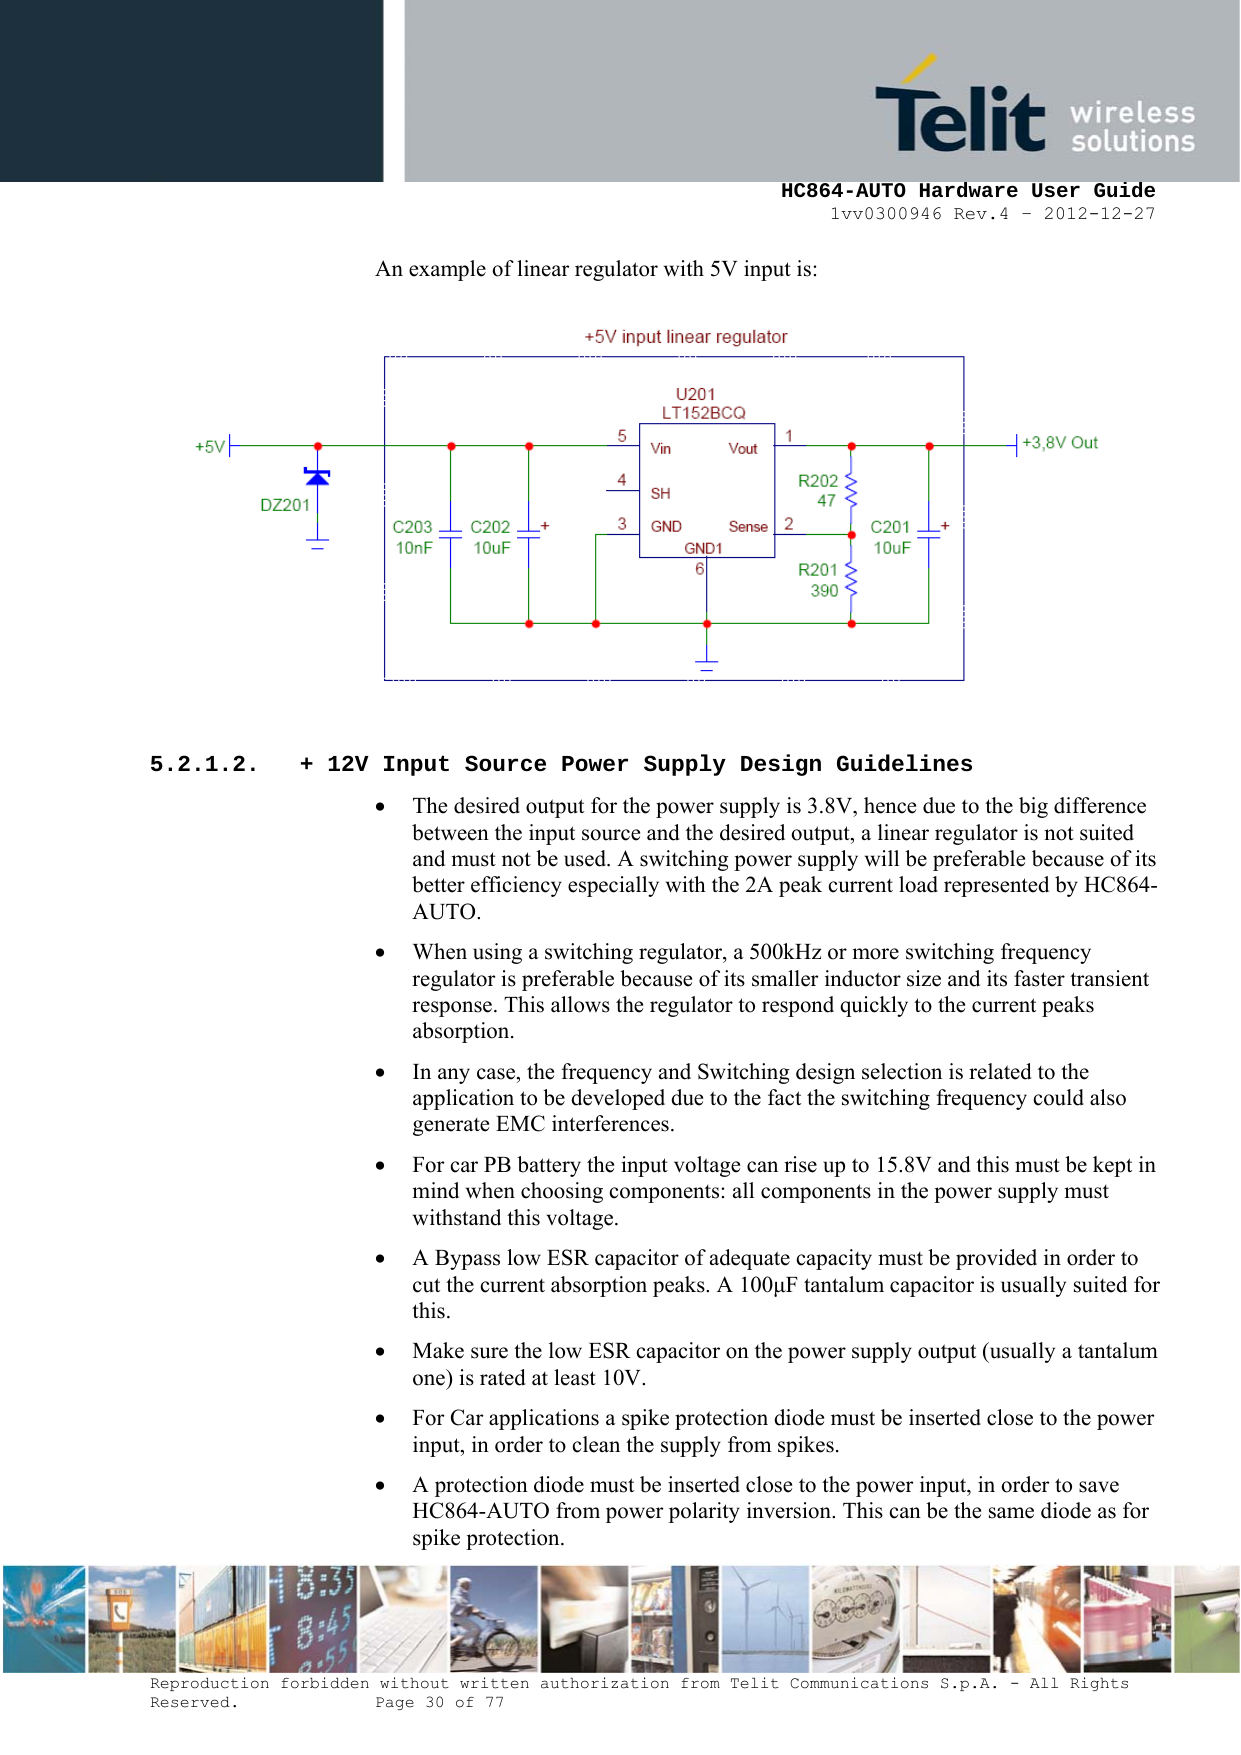     HC864-AUTO Hardware User Guide 1vv0300946 Rev.4 – 2012-12-27 Reproduction forbidden without written authorization from Telit Communications S.p.A. - All Rights Reserved.    Page 30 of 77  An example of linear regulator with 5V input is:  5.2.1.2. + 12V Input Source Power Supply Design Guidelines • The desired output for the power supply is 3.8V, hence due to the big difference between the input source and the desired output, a linear regulator is not suited and must not be used. A switching power supply will be preferable because of its better efficiency especially with the 2A peak current load represented by HC864-AUTO.  • When using a switching regulator, a 500kHz or more switching frequency regulator is preferable because of its smaller inductor size and its faster transient response. This allows the regulator to respond quickly to the current peaks absorption.  • In any case, the frequency and Switching design selection is related to the application to be developed due to the fact the switching frequency could also generate EMC interferences. • For car PB battery the input voltage can rise up to 15.8V and this must be kept in mind when choosing components: all components in the power supply must withstand this voltage. • A Bypass low ESR capacitor of adequate capacity must be provided in order to cut the current absorption peaks. A 100F tantalum capacitor is usually suited for this. • Make sure the low ESR capacitor on the power supply output (usually a tantalum one) is rated at least 10V. • For Car applications a spike protection diode must be inserted close to the power input, in order to clean the supply from spikes.  • A protection diode must be inserted close to the power input, in order to save HC864-AUTO from power polarity inversion. This can be the same diode as for spike protection. 